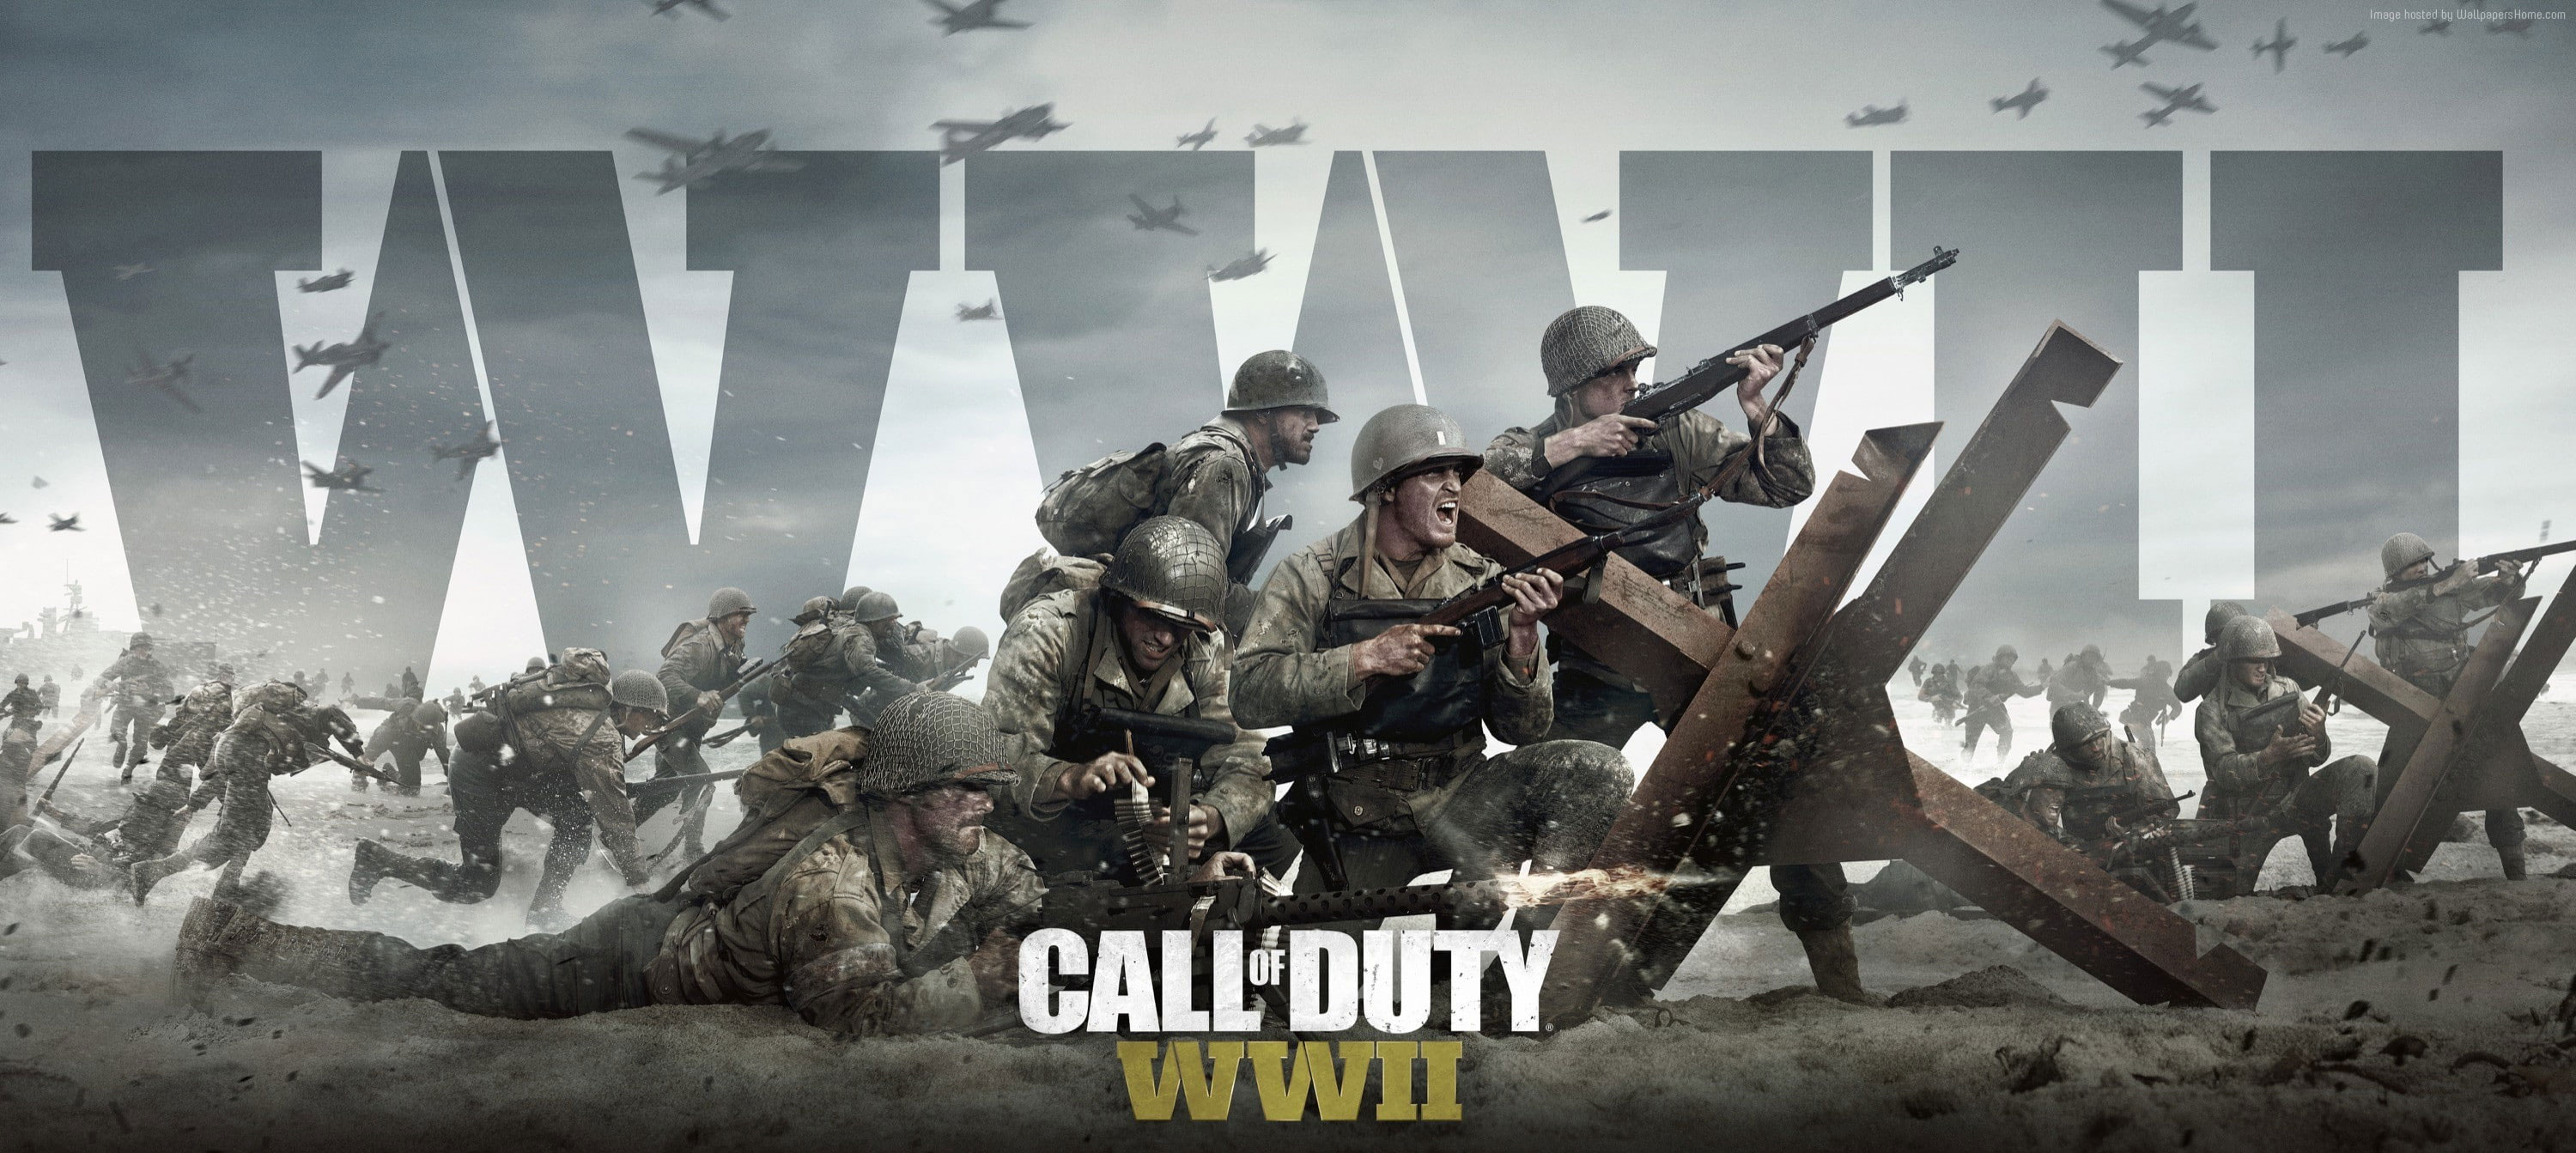 Wallpaper Poster, Call Of Duty Ww2, E3 2017, Call Of Duty, Game